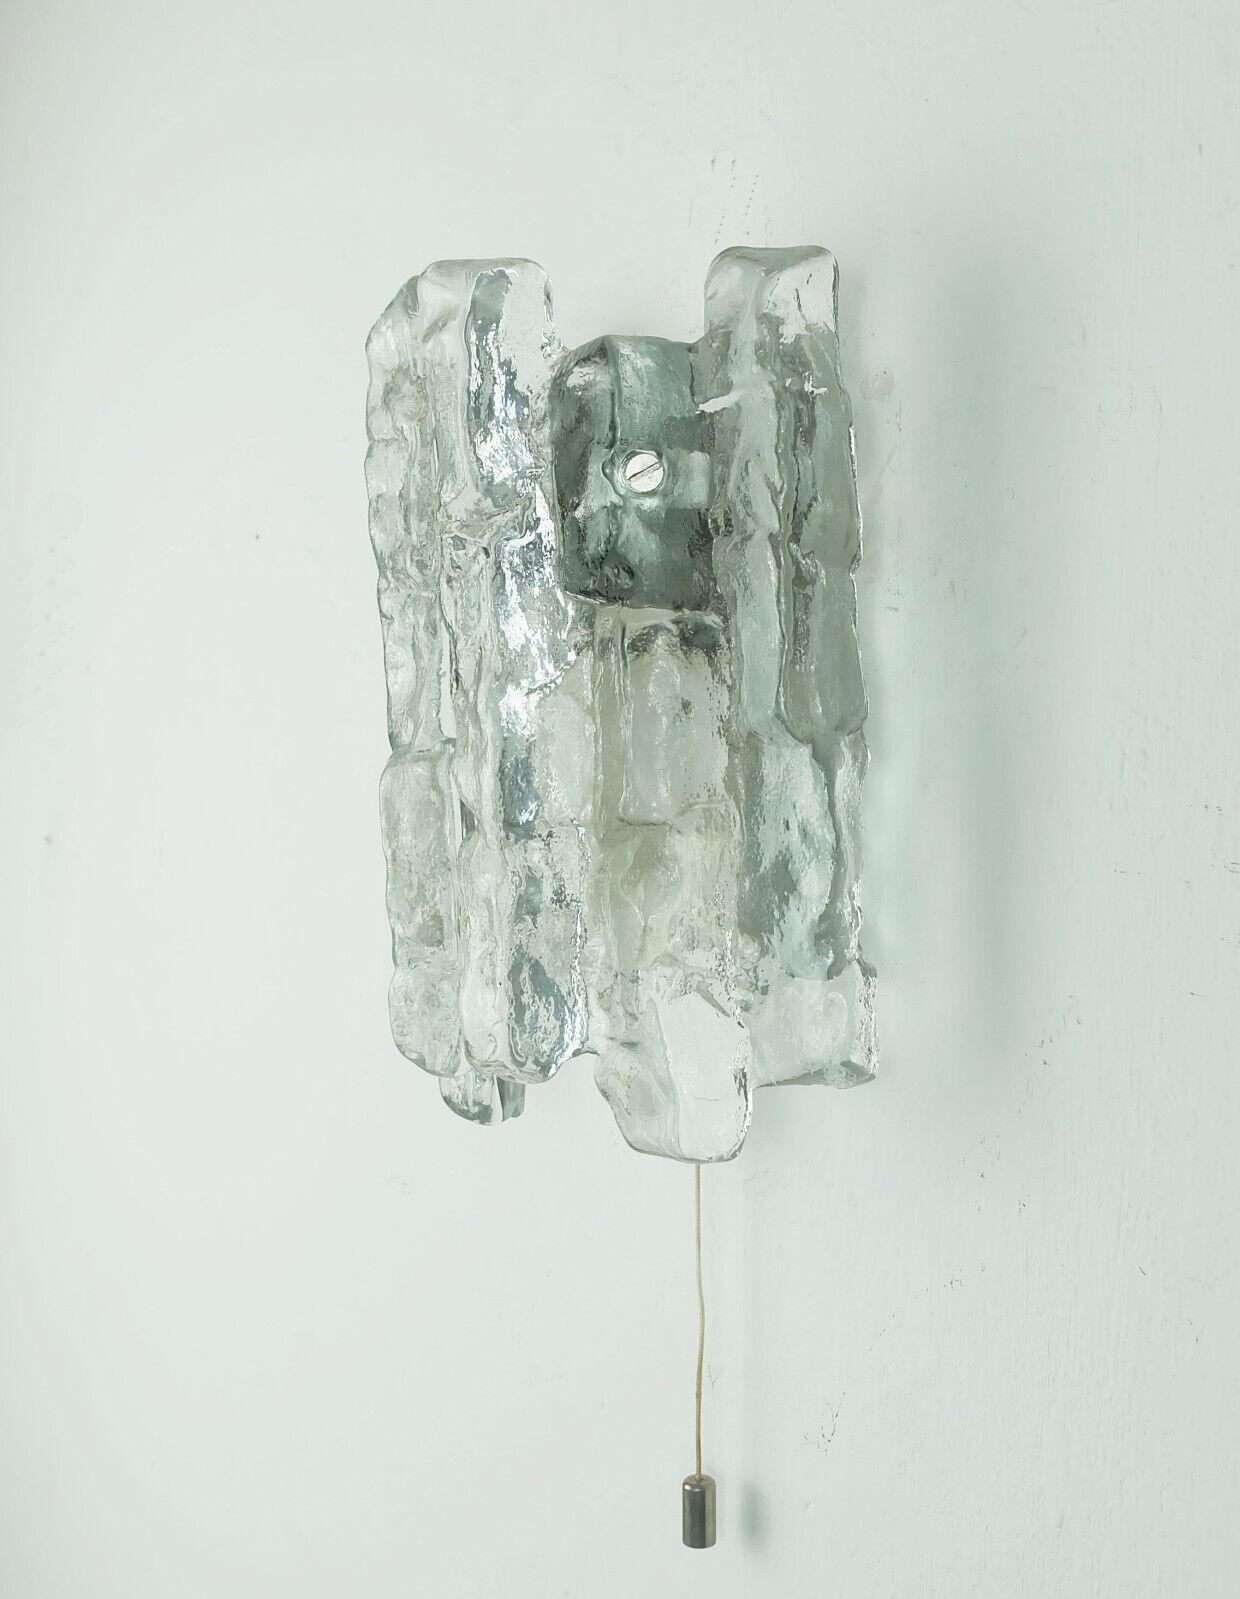 Mid century wall lamp manufactured in the 1960s / 70s by Kalmar Franken (model 4541/1, series 106/6/8). Thick structured glass in ice look, silver-colored metal wall mount. Holds one E14 light bulb.

Dimensions in cm:
Height 19 cm, width 13 cm,